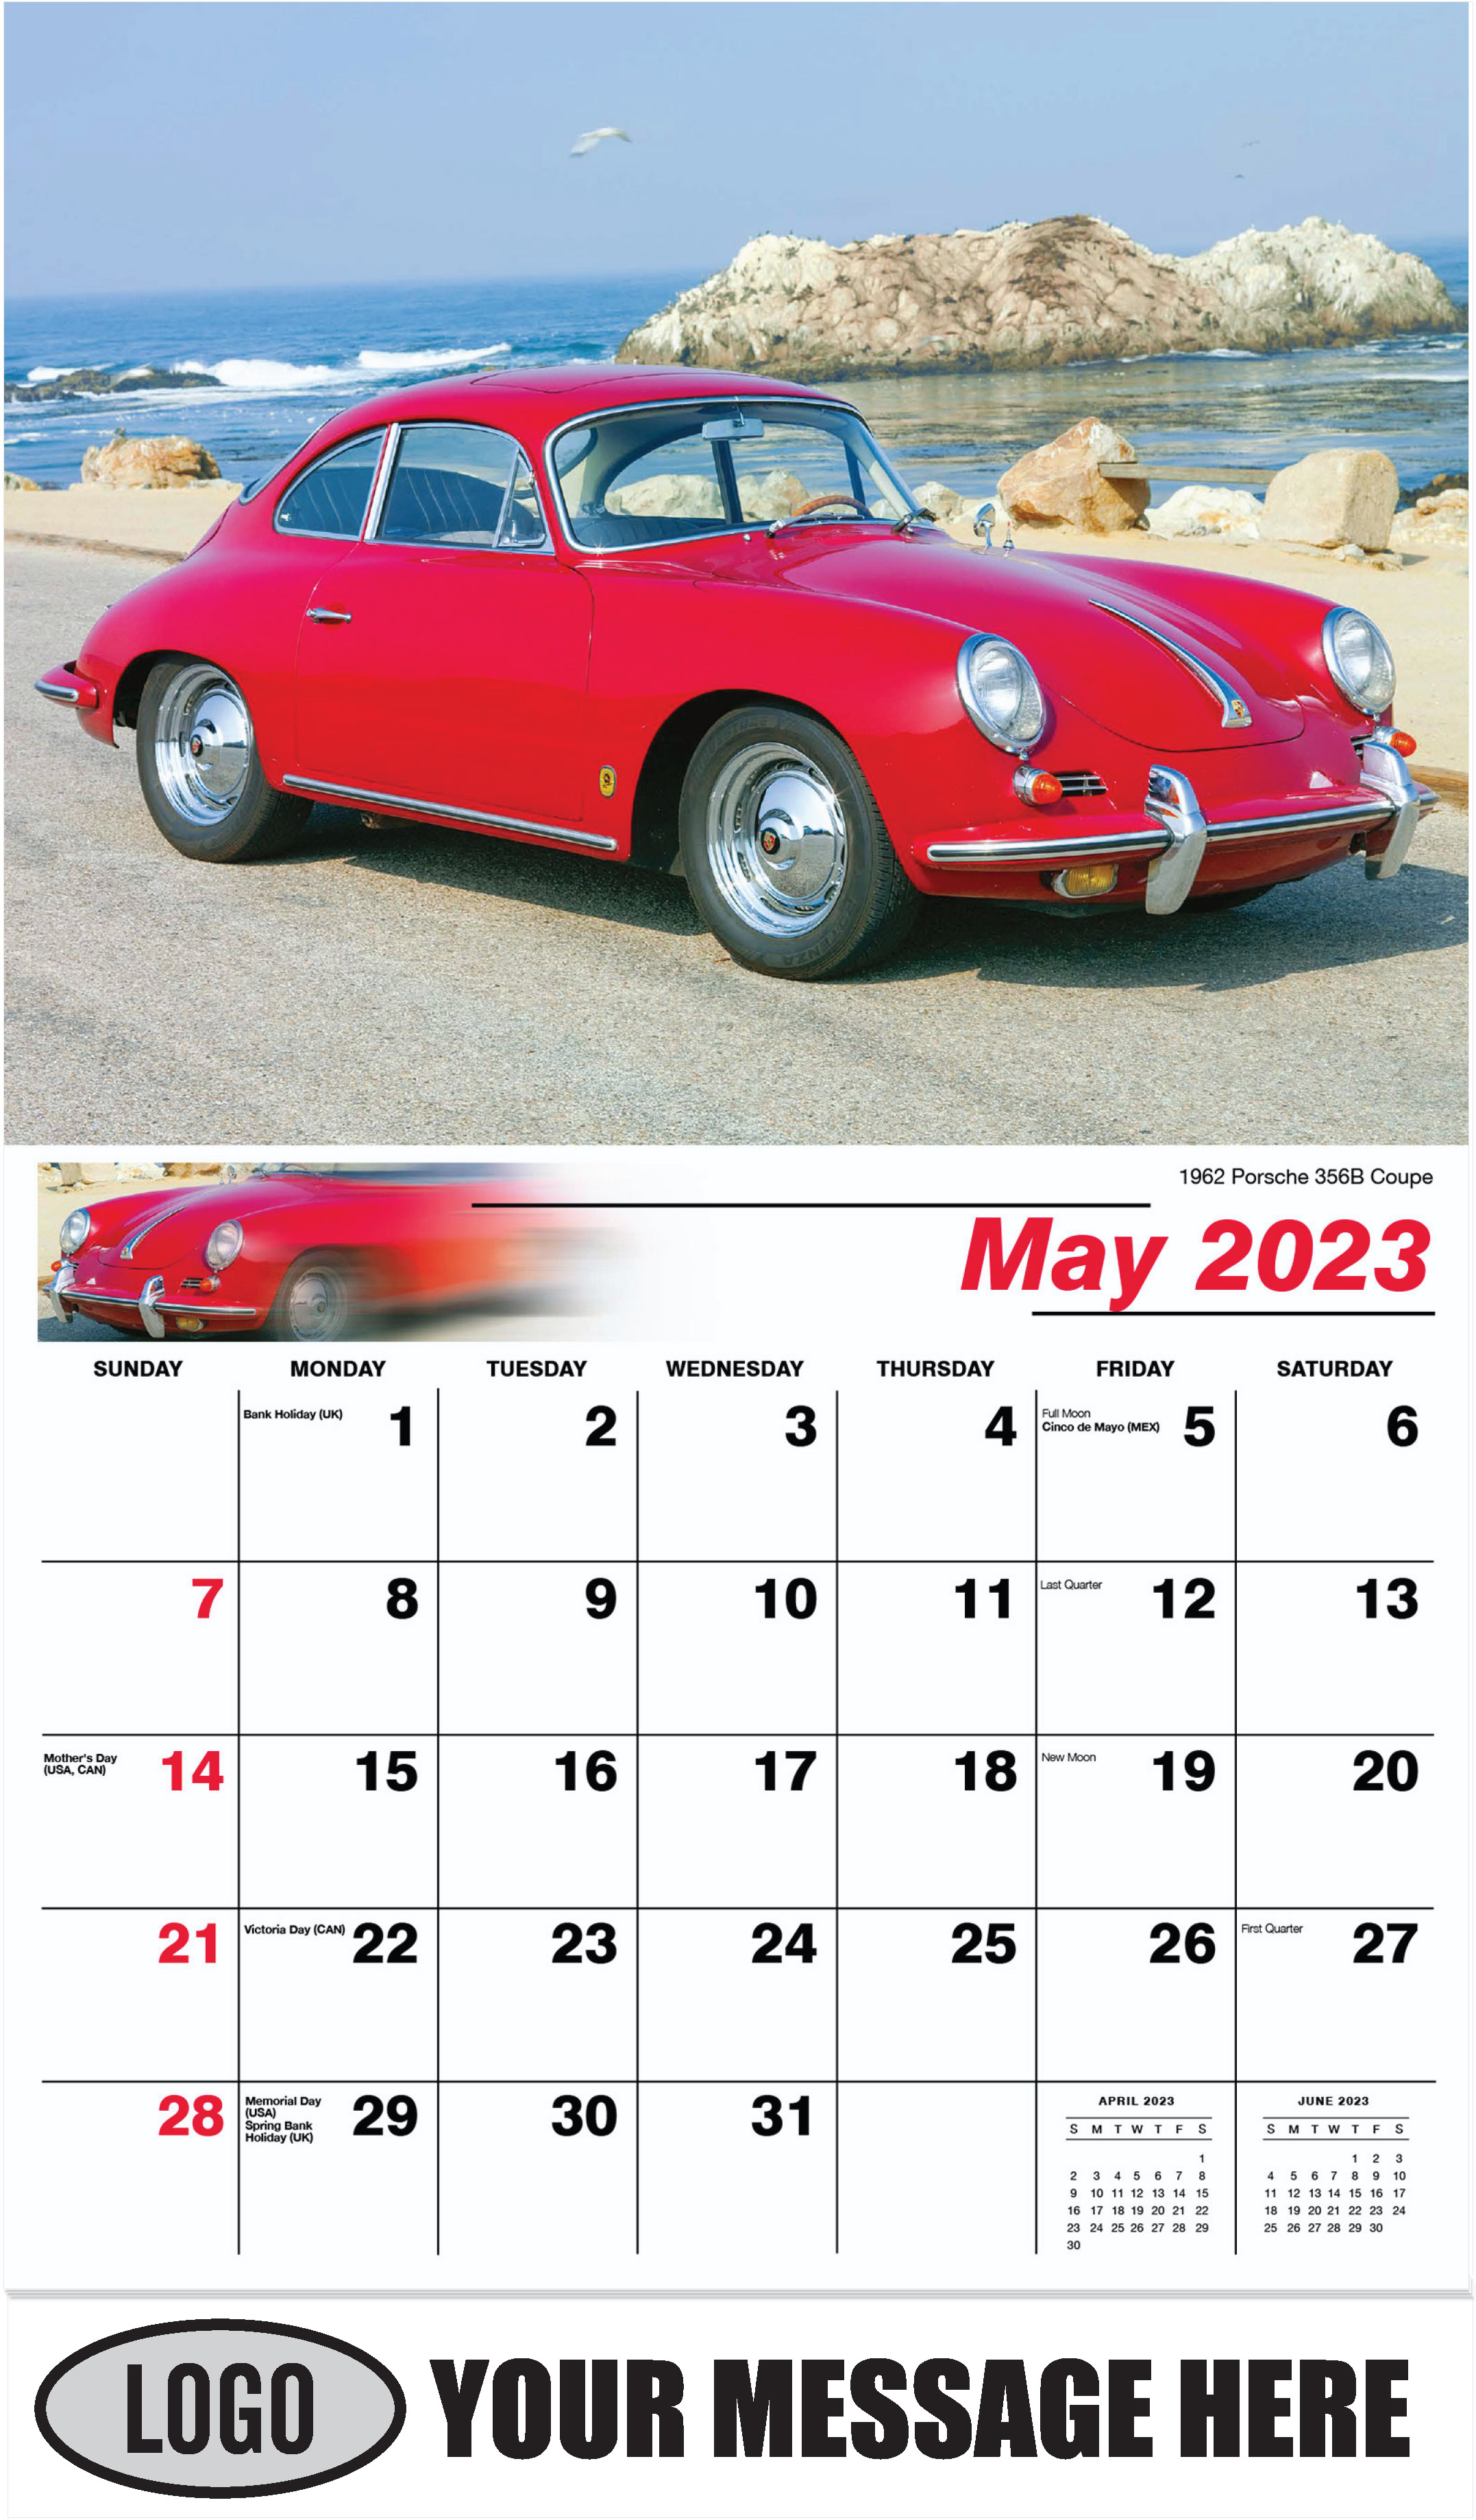 1962 Porsche 356B Coupe - May - Classic Cars 2023 Promotional Calendar